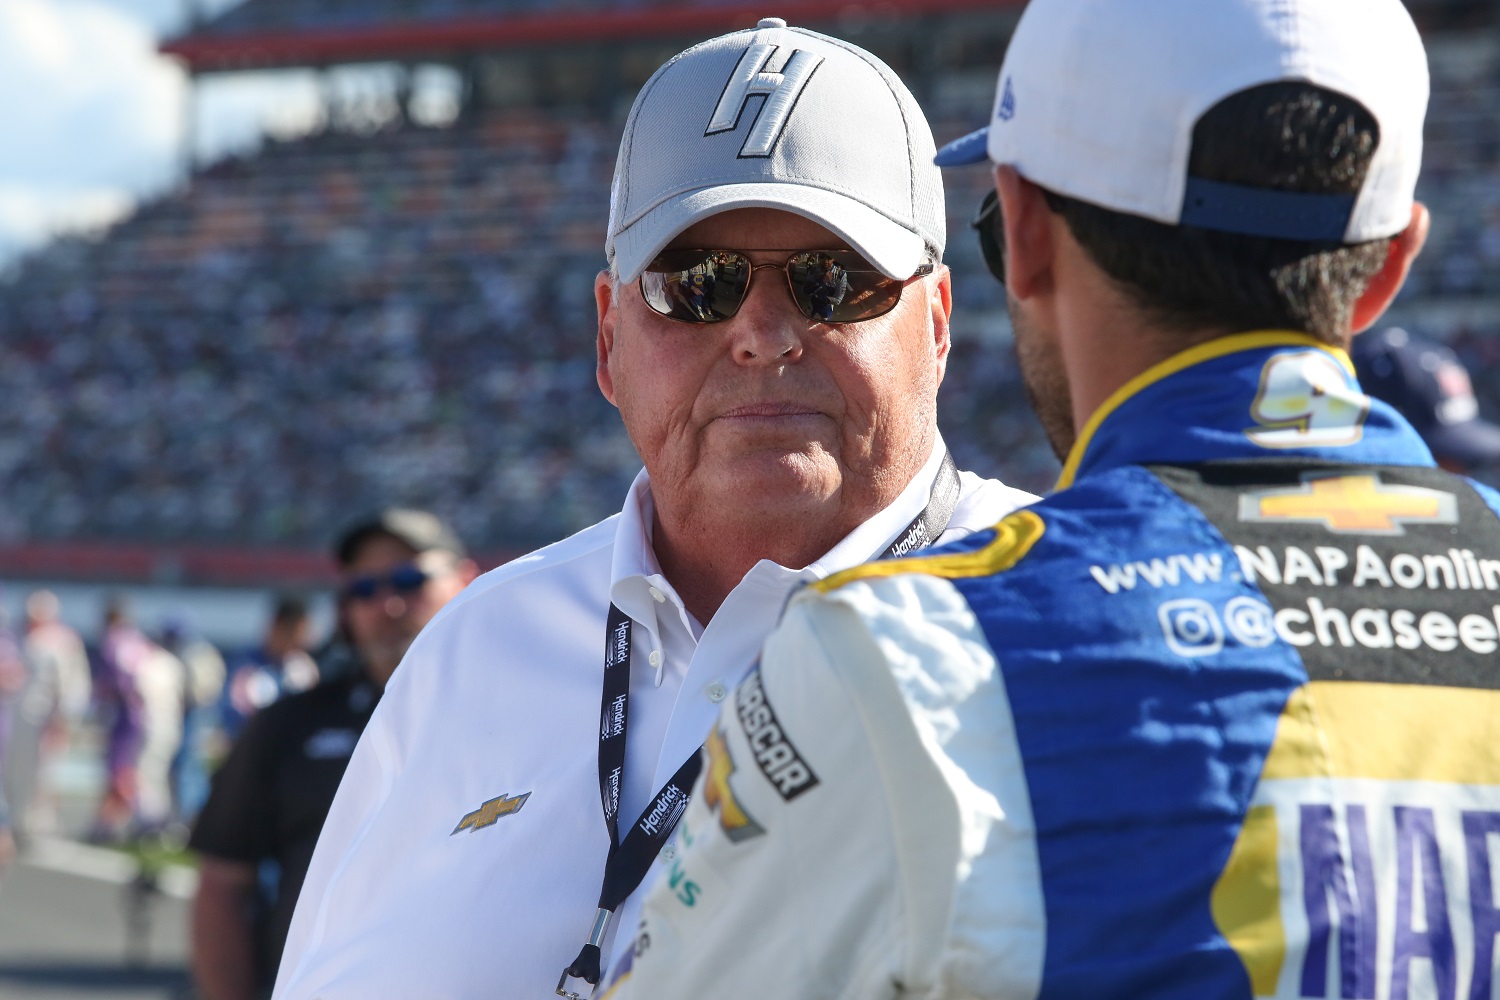 Rick Hendrick talks with Chase Elliott, driver of the No. 9 Chevrolet, before the Coca-Cola 600 on May 30, 2021.